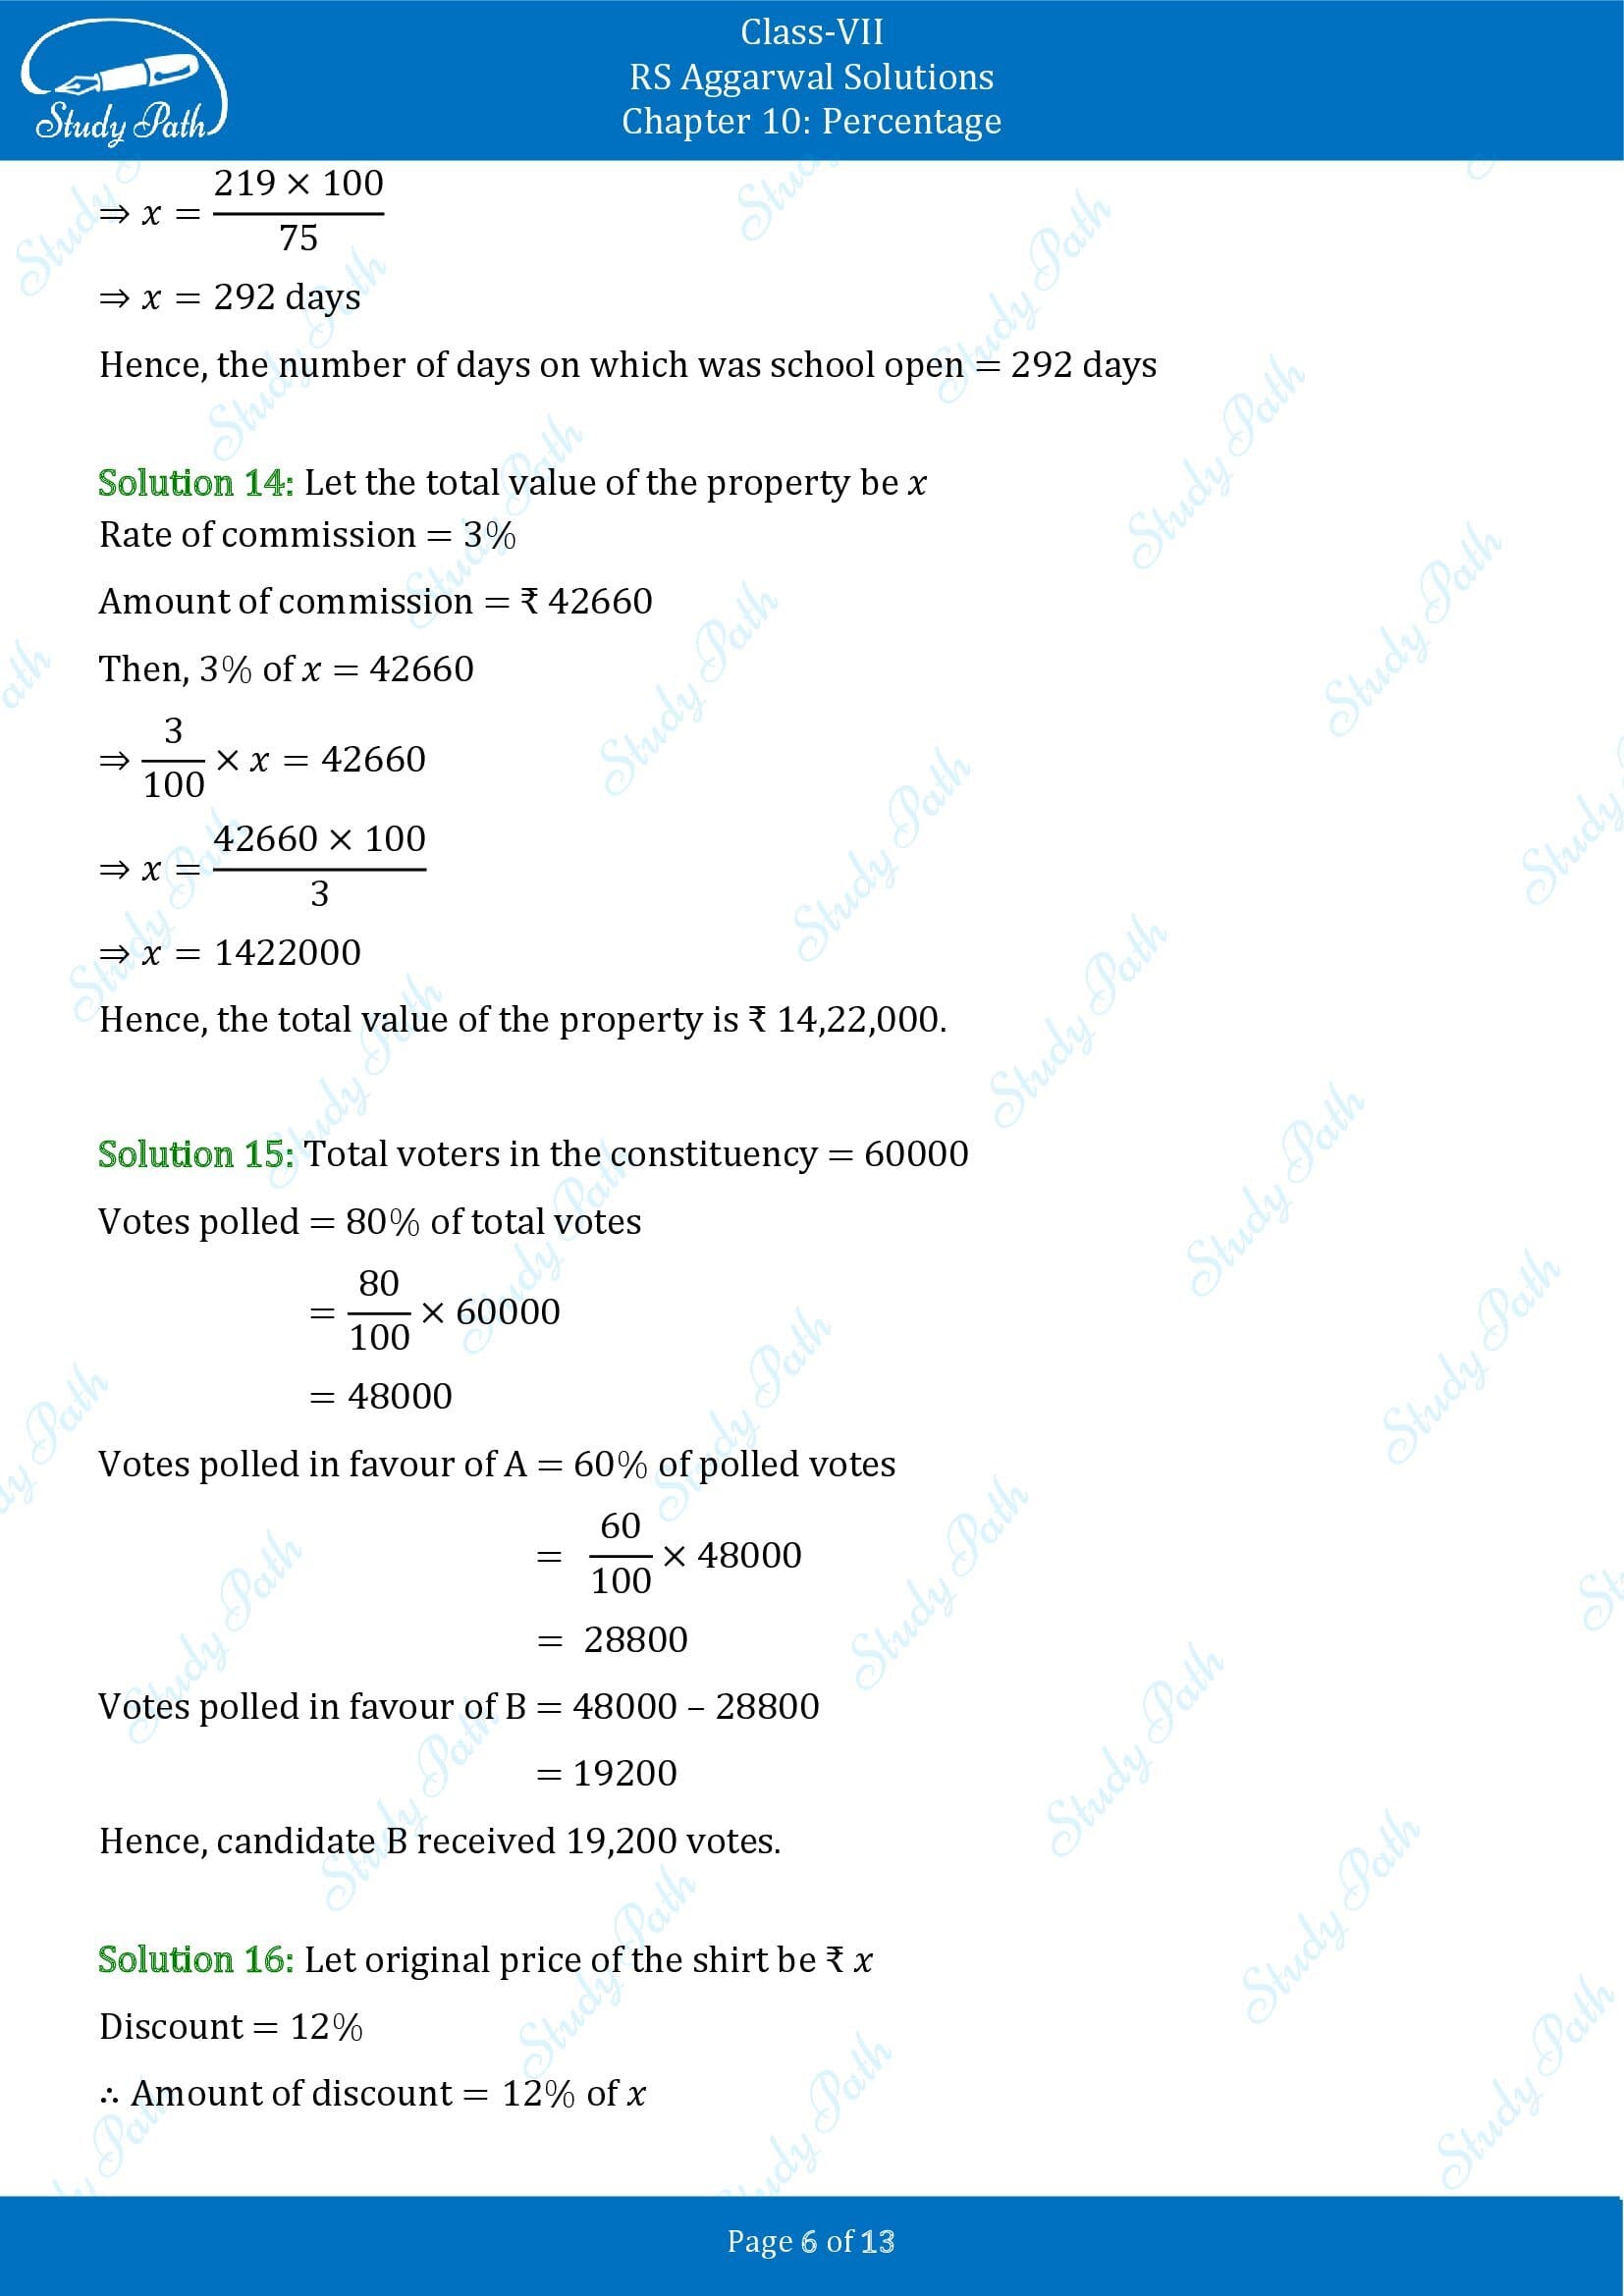 RS Aggarwal Solutions Class 7 Chapter 10 Percentage Exercise 10B 00006